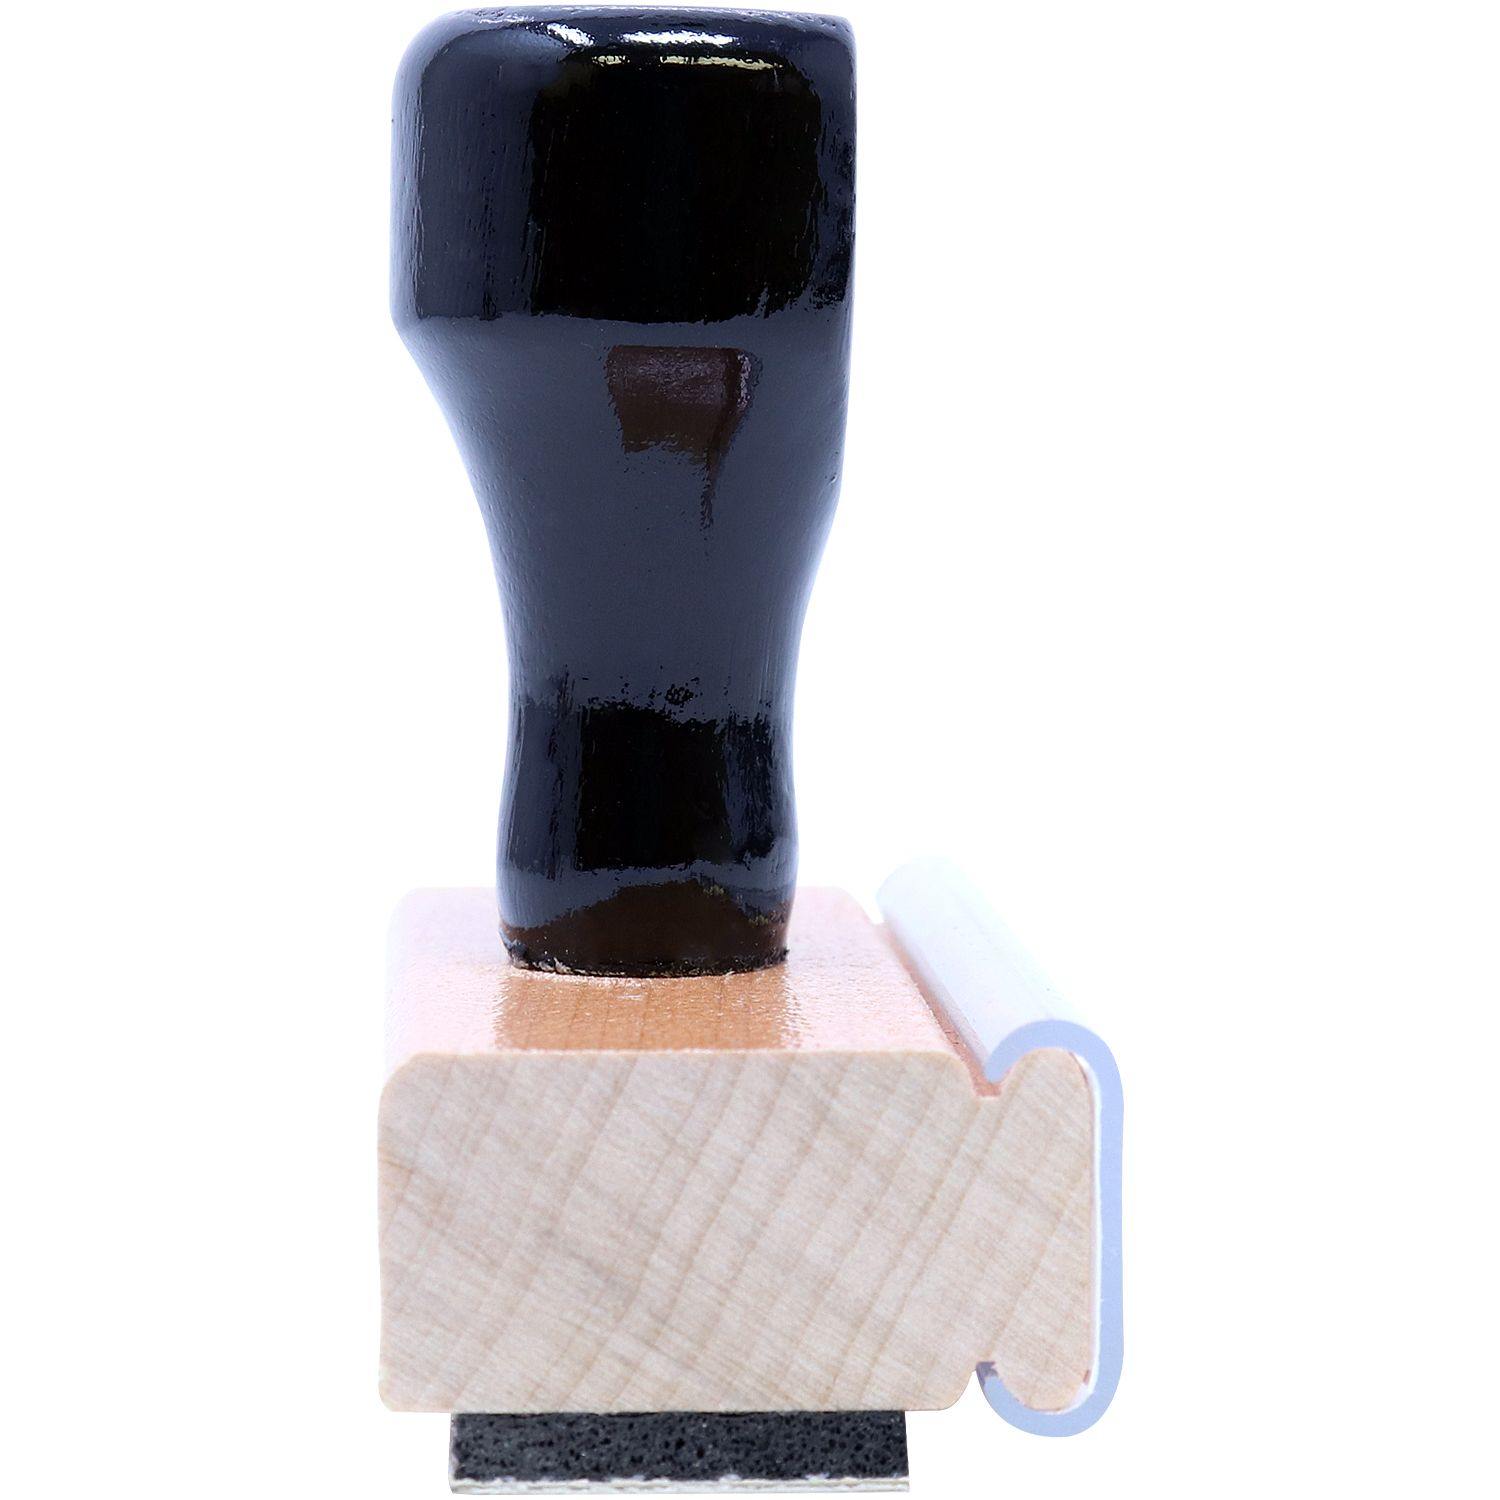 Side View of Client's Copy Rubber Stamp